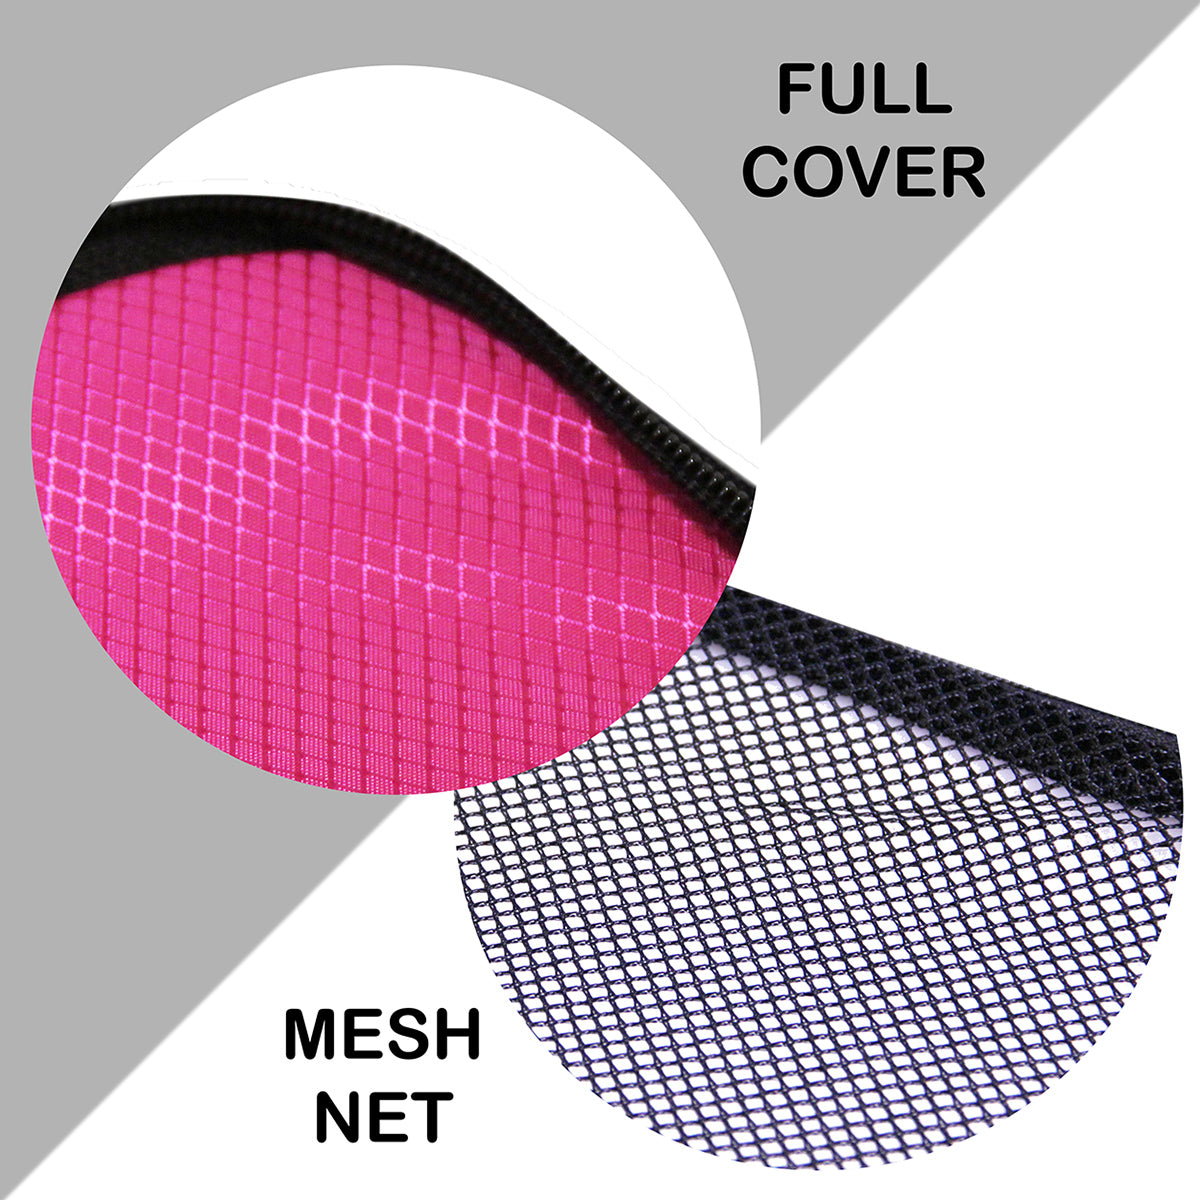 Travel Packing Cube Mesh & Covered Bags - PACK of 4 (Hot Pink)